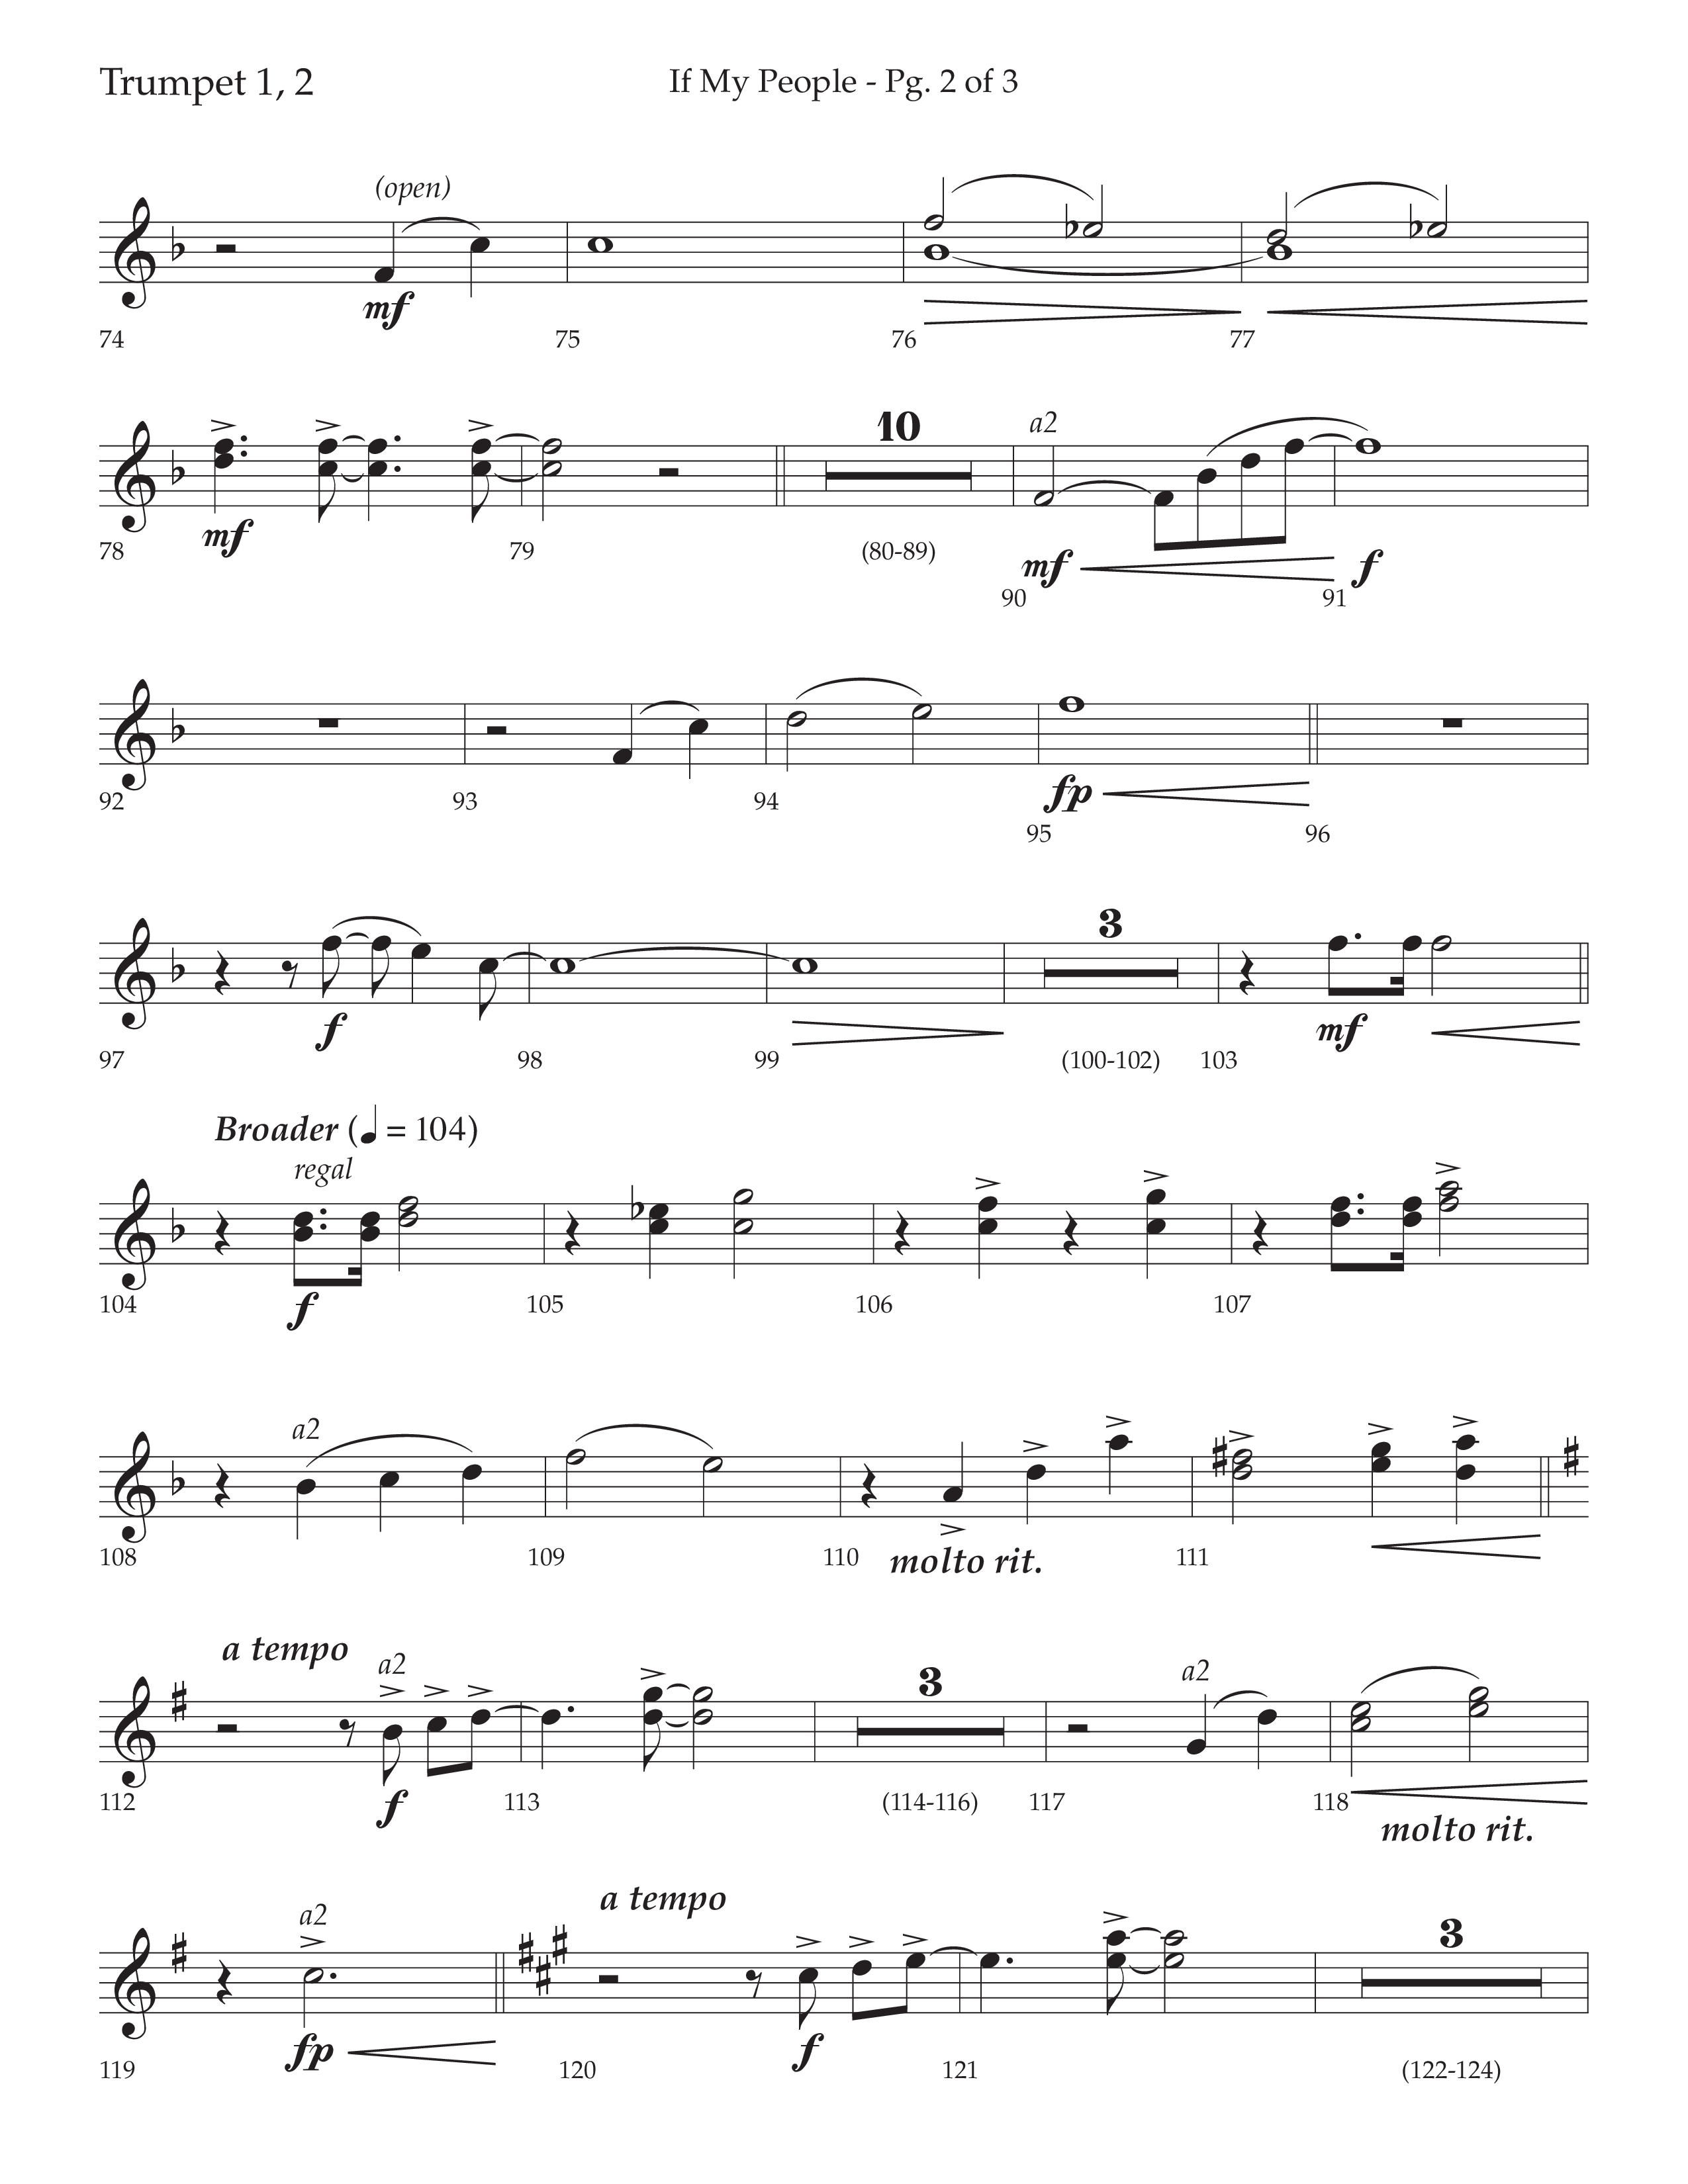 If My People (Choral Anthem SATB) Trumpet 1,2 (Lifeway Choral / Arr. David Wise / Orch. David Shipps)